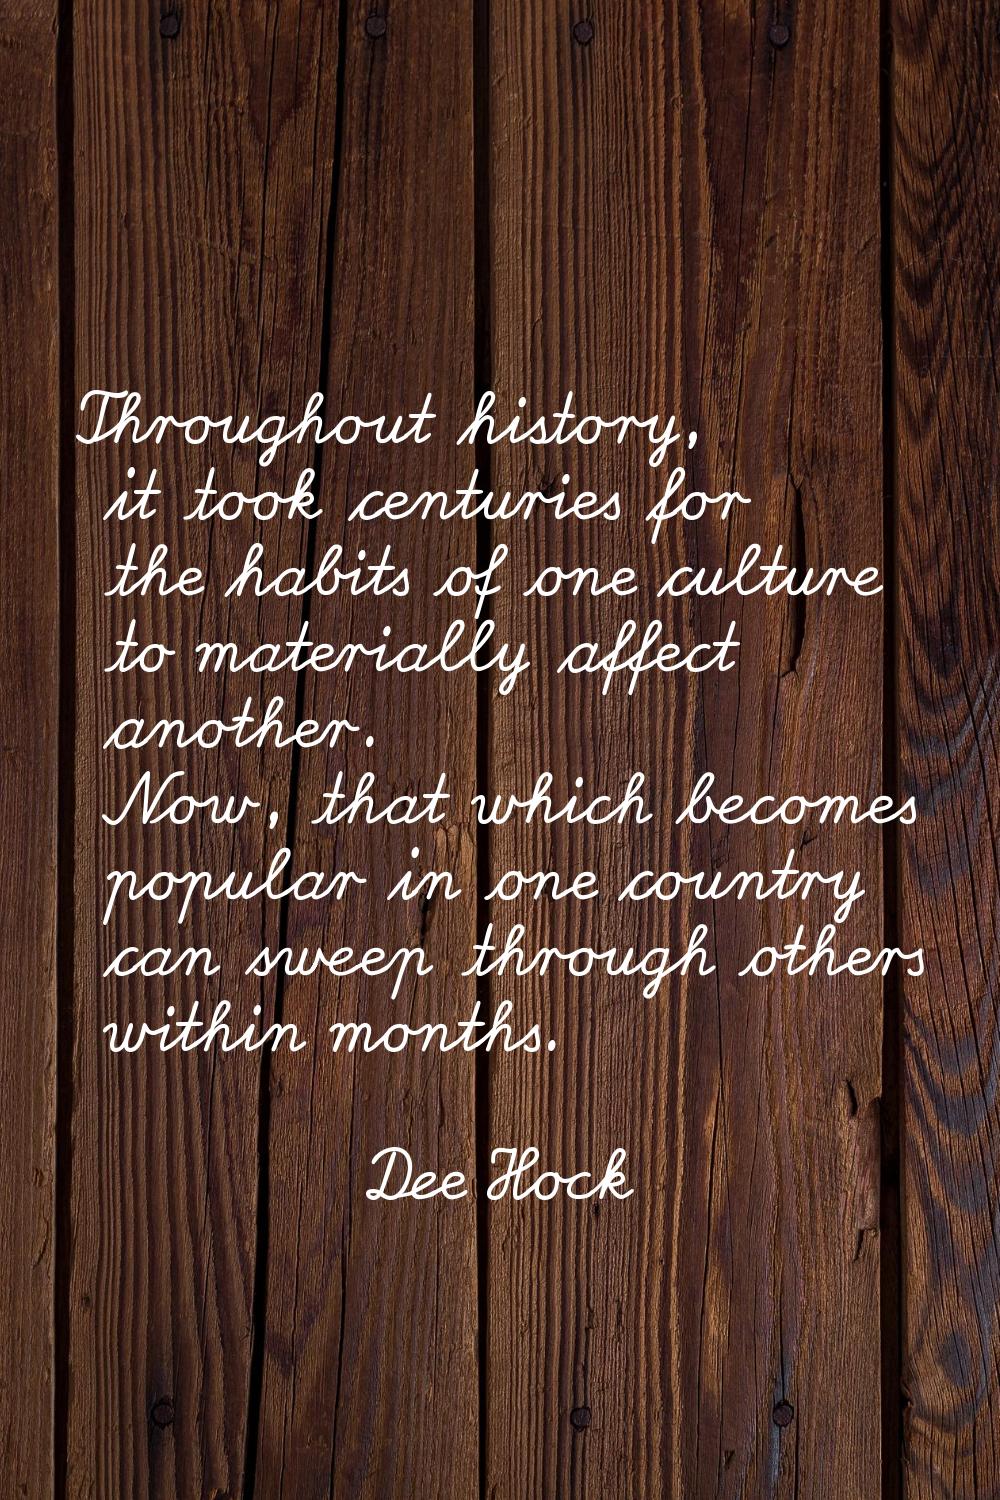 Throughout history, it took centuries for the habits of one culture to materially affect another. N